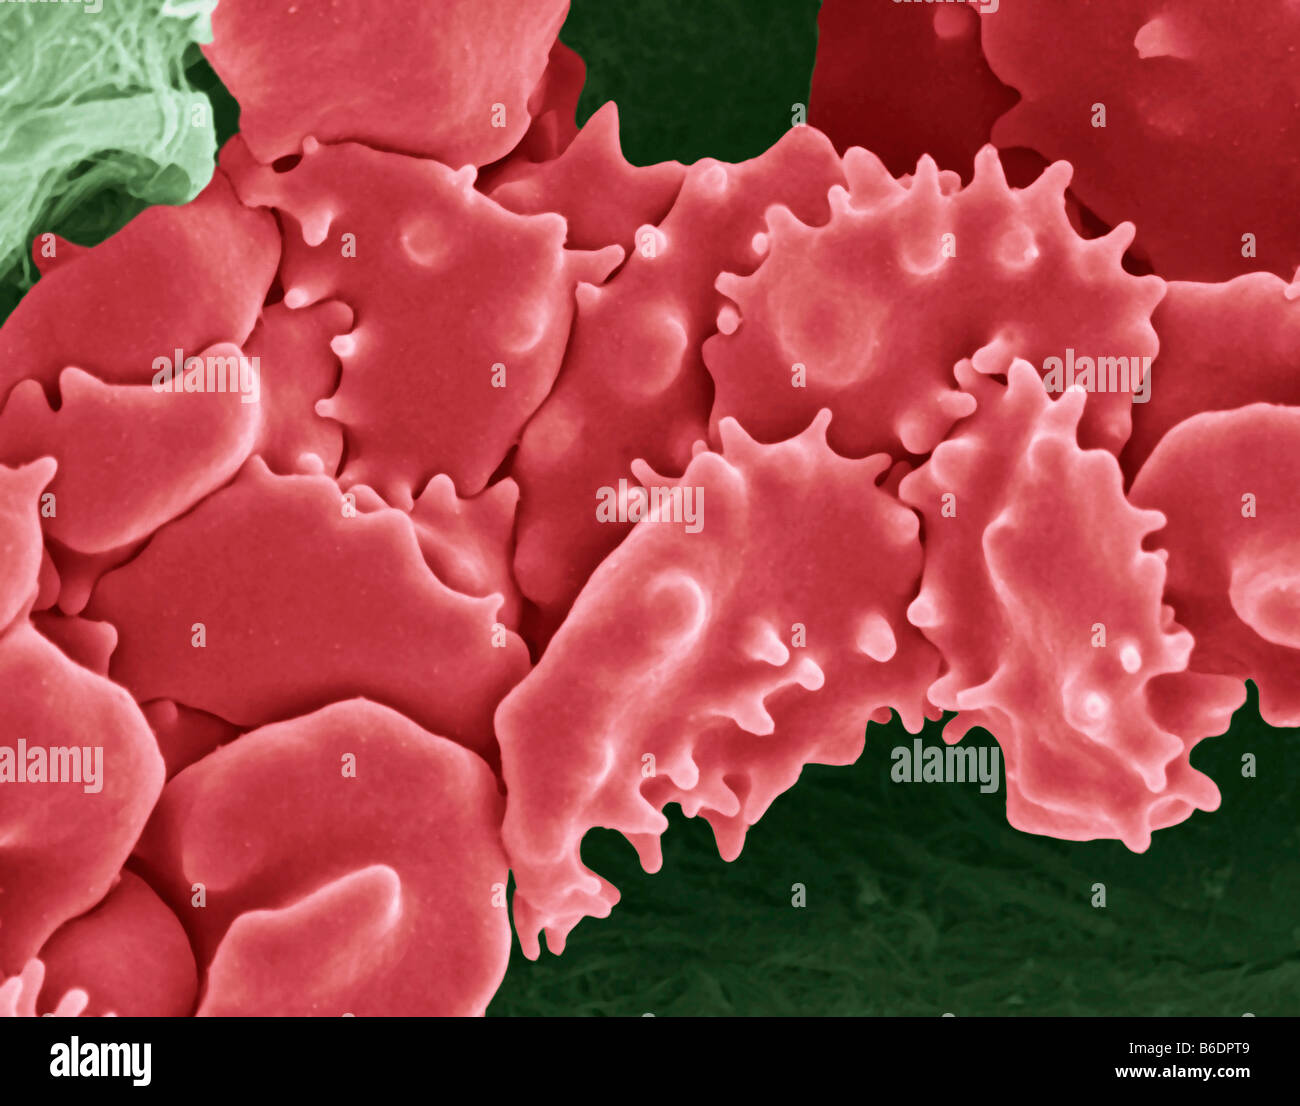 Crenated Blood Clot Coloured Scanning Electron Micrograph Sem Red Blood Cells Are Red And Fibrin Proteinstrands Are Green Stock Photo Alamy